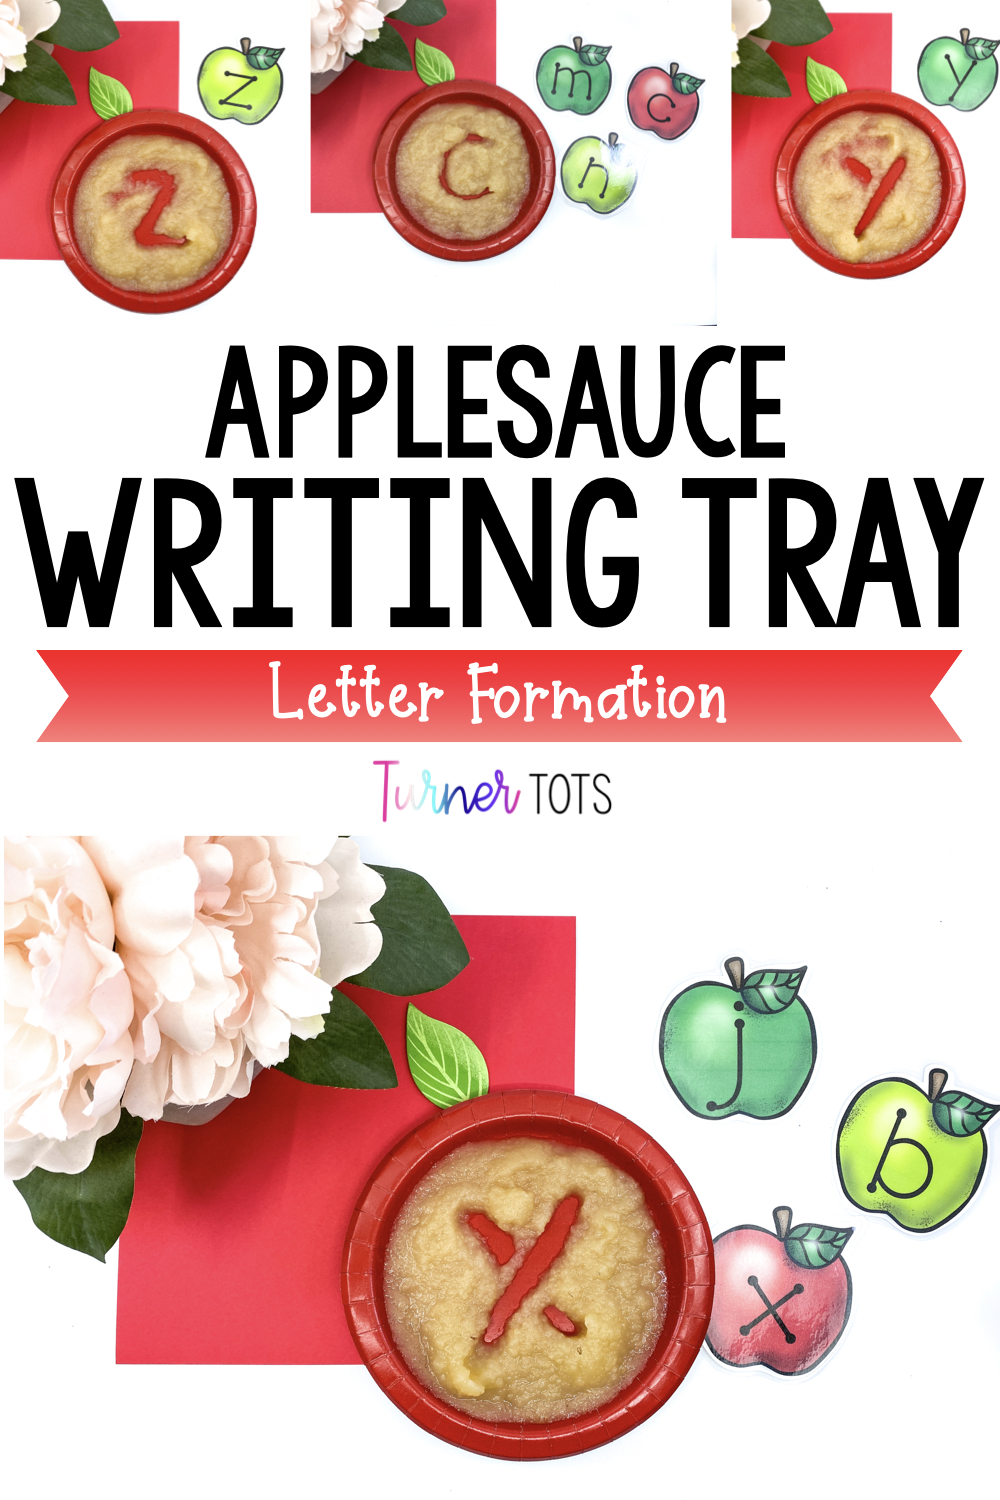 Apple Literacy Activities You'll Think Are Amazingly Red Delicious ...